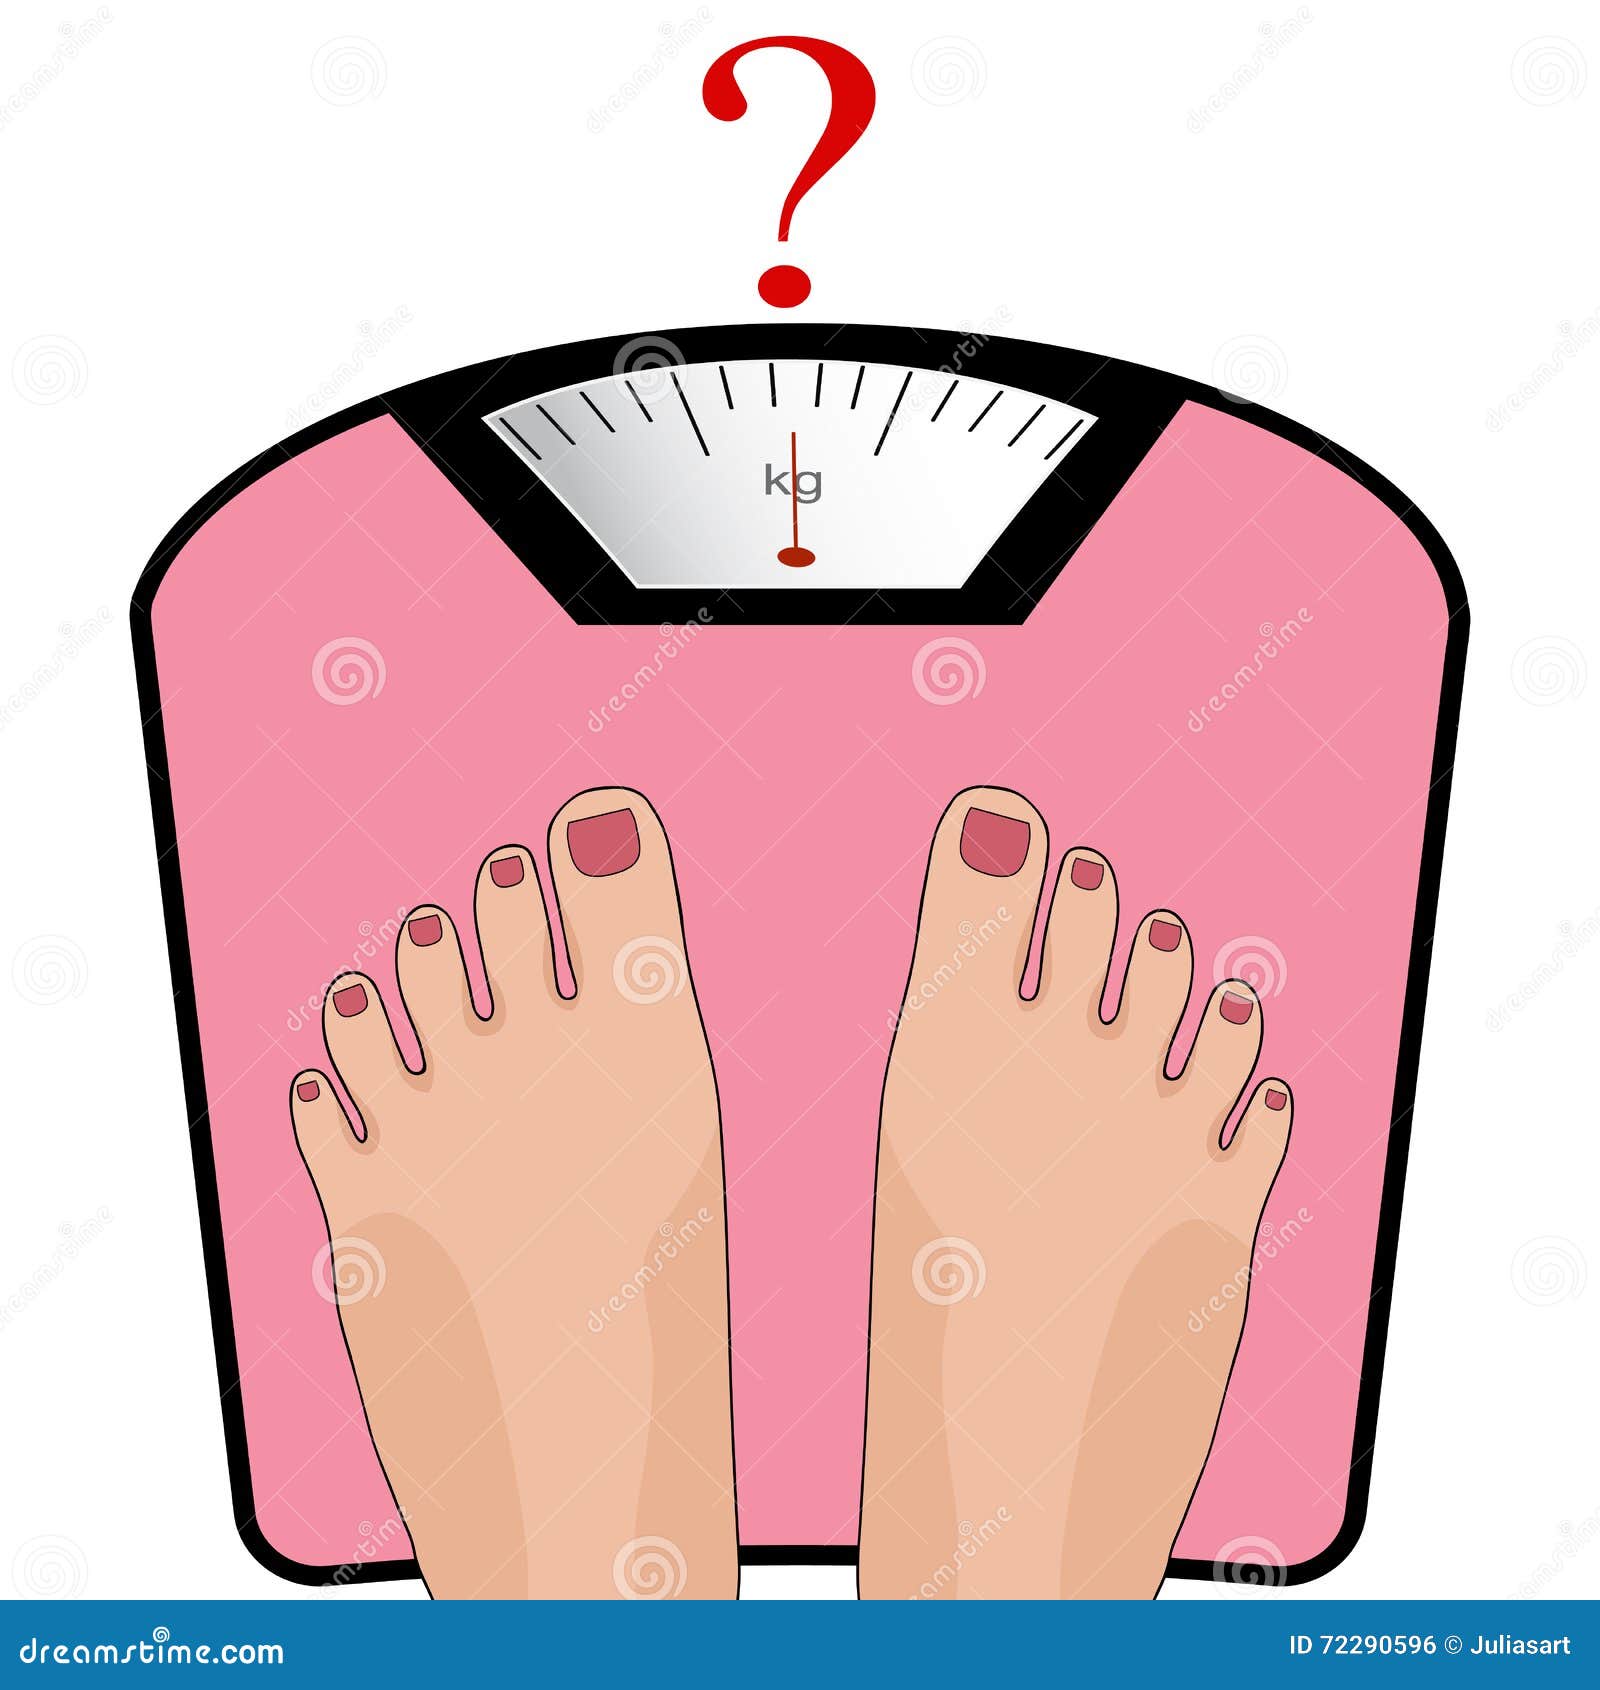 https://thumbs.dreamstime.com/z/vector-feet-scale-concept-weight-loss-healthy-lifest-lifestyles-diet-proper-nutrition-72290596.jpg